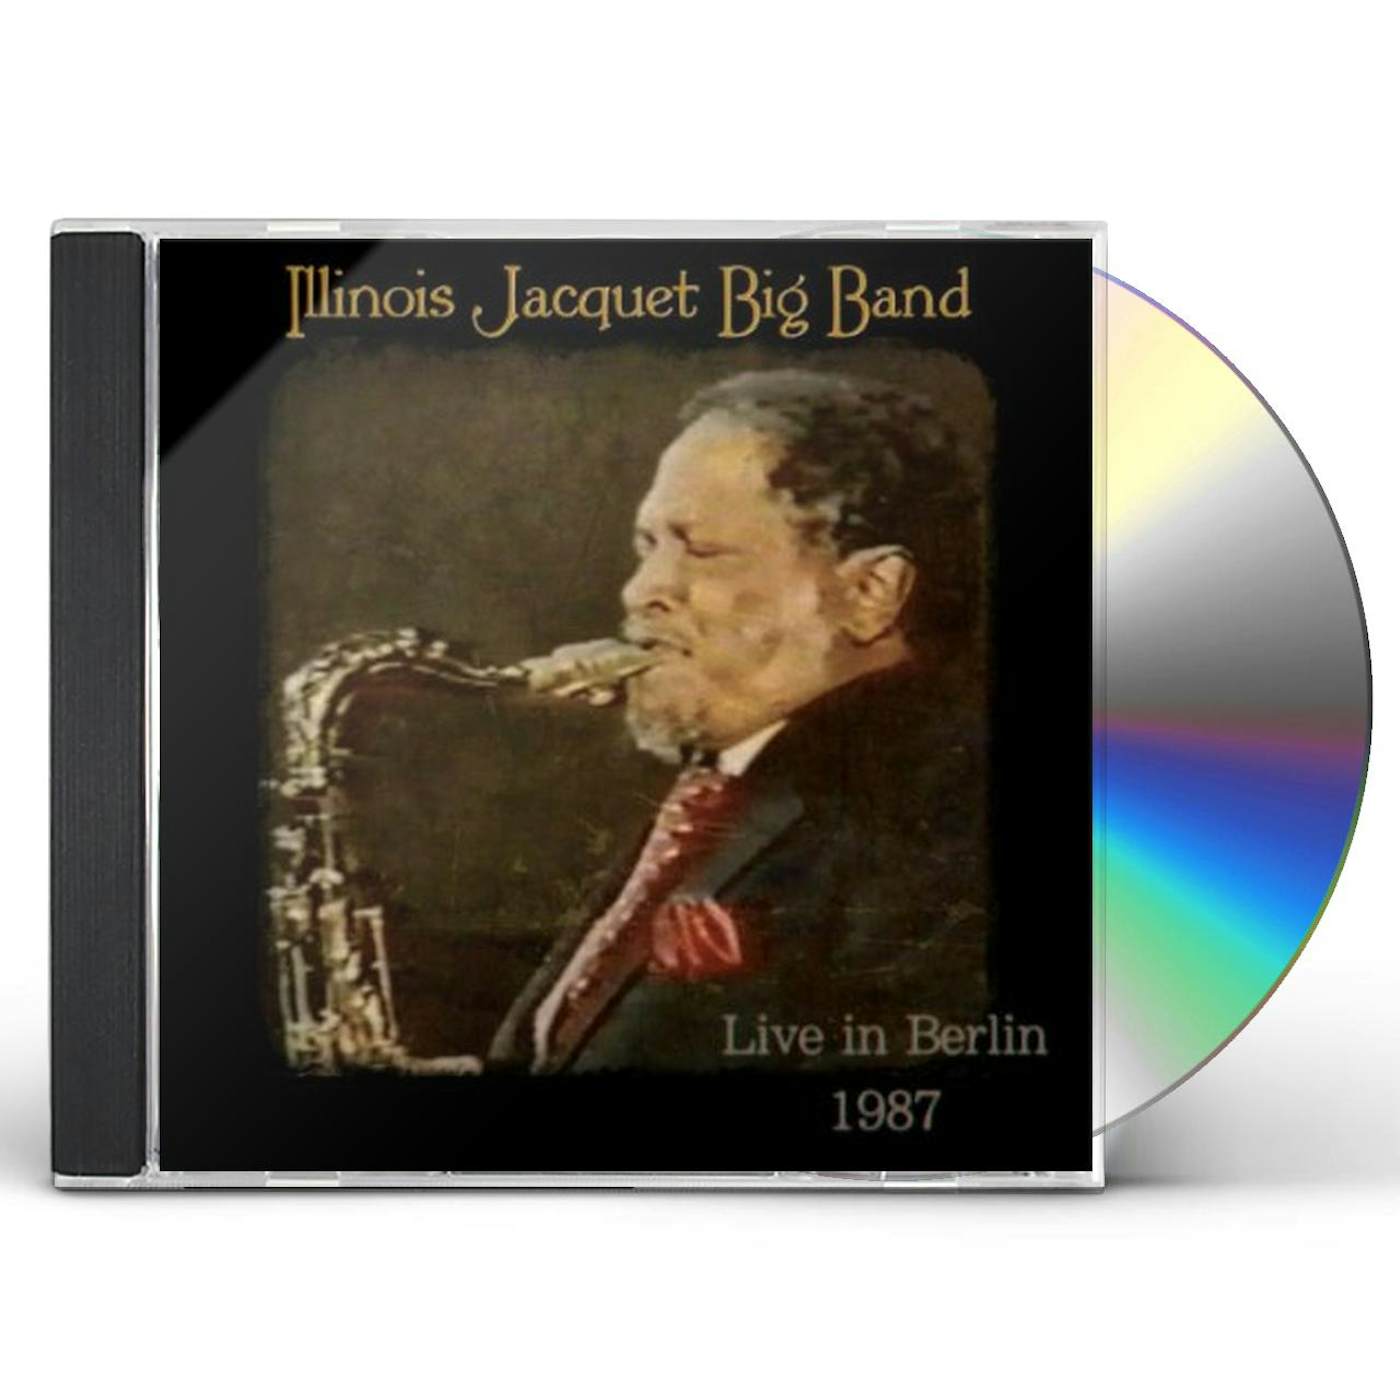 Illinois Jacquet BIG BAND LIVE IN BERLIN 1987 CD